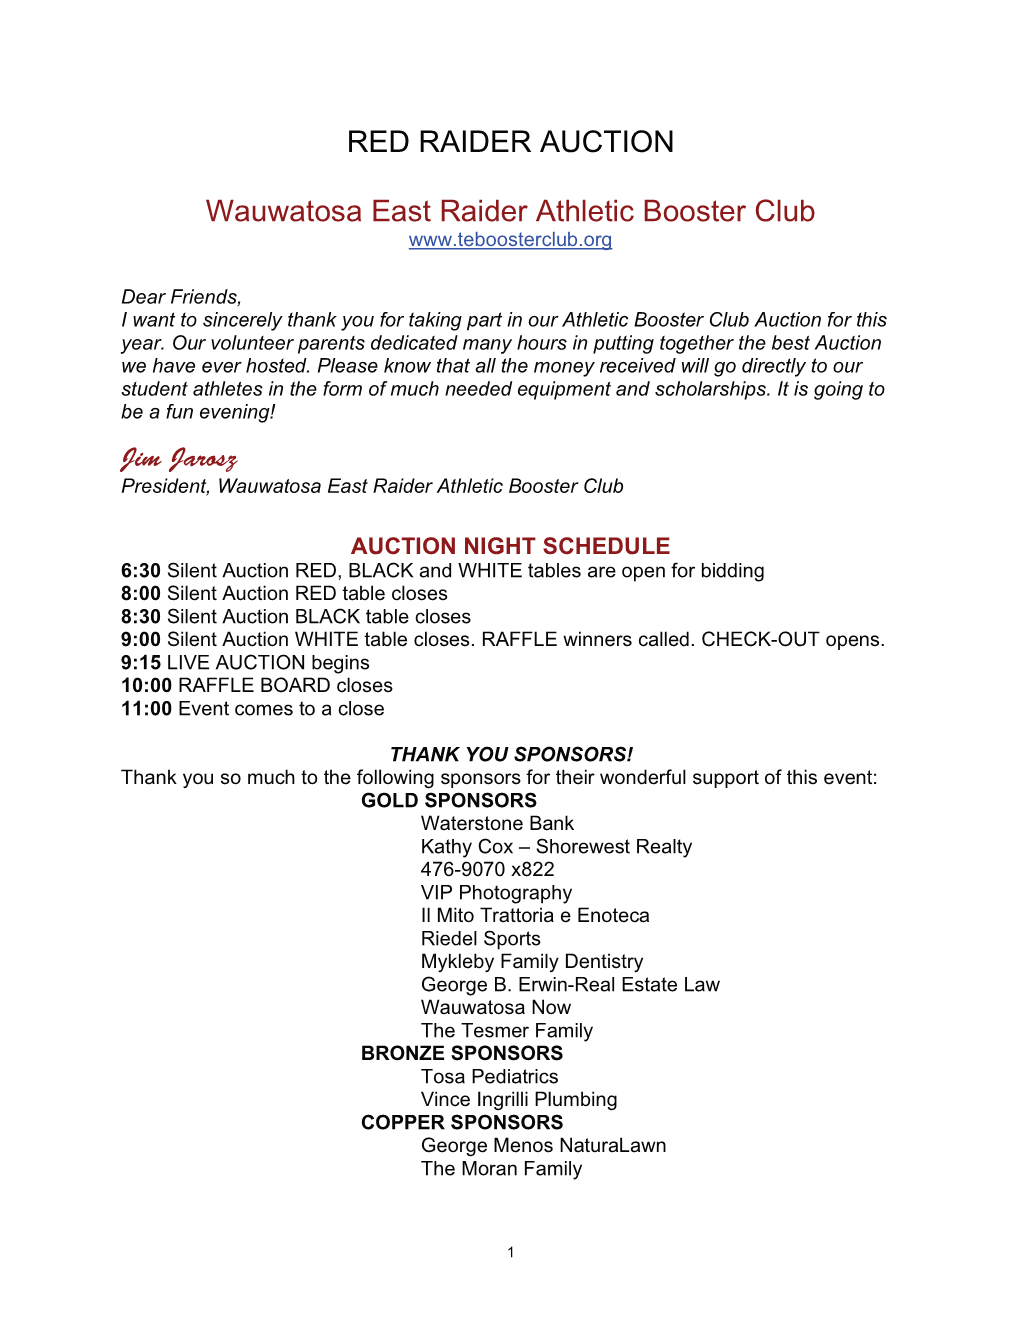 RED RAIDER AUCTION Wauwatosa East Raider Athletic Booster Club